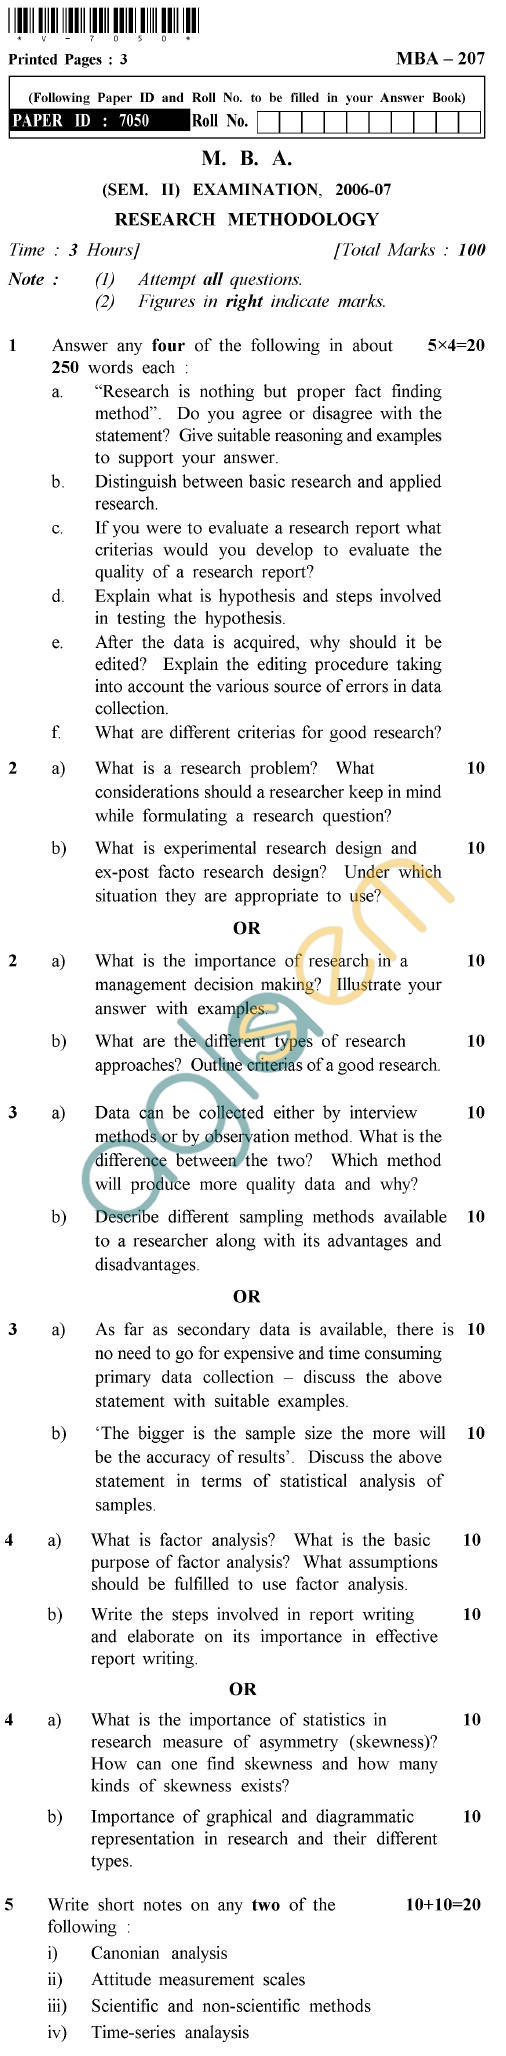 UPTU MBA Question Papers - MBA-207-Research Methodology